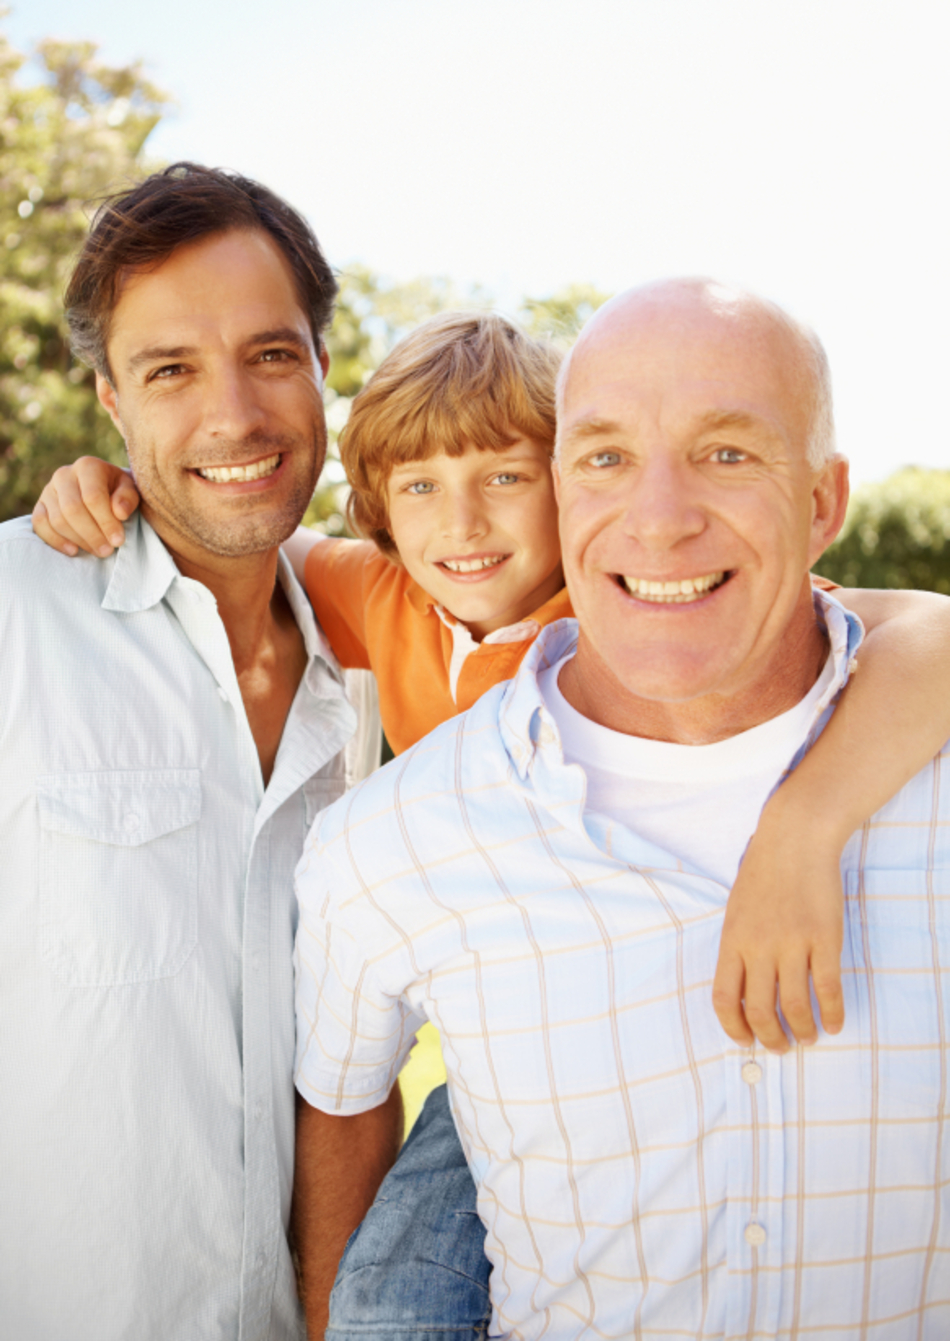 When it comes to Prostate Cancer, Your Family is Key